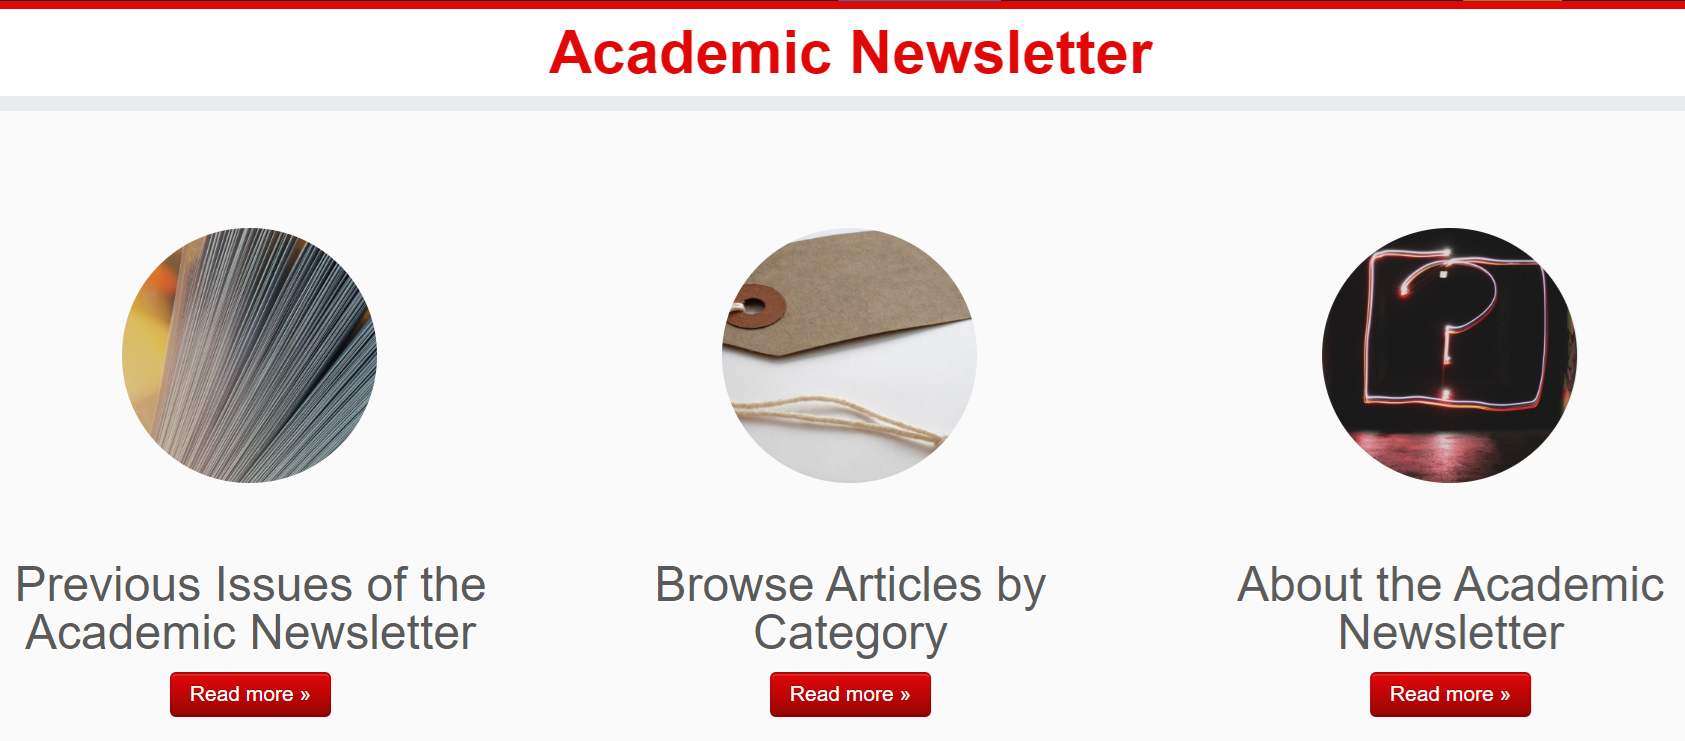 A screen capture of the Academic Newsletter website (http://open2.senecac.on.ca/sites/academicnewsletter/) showing the "Previous Issues of the Academic Newsletter," "Browse Articles by Category," and "About the Academic Newsletter" buttons.